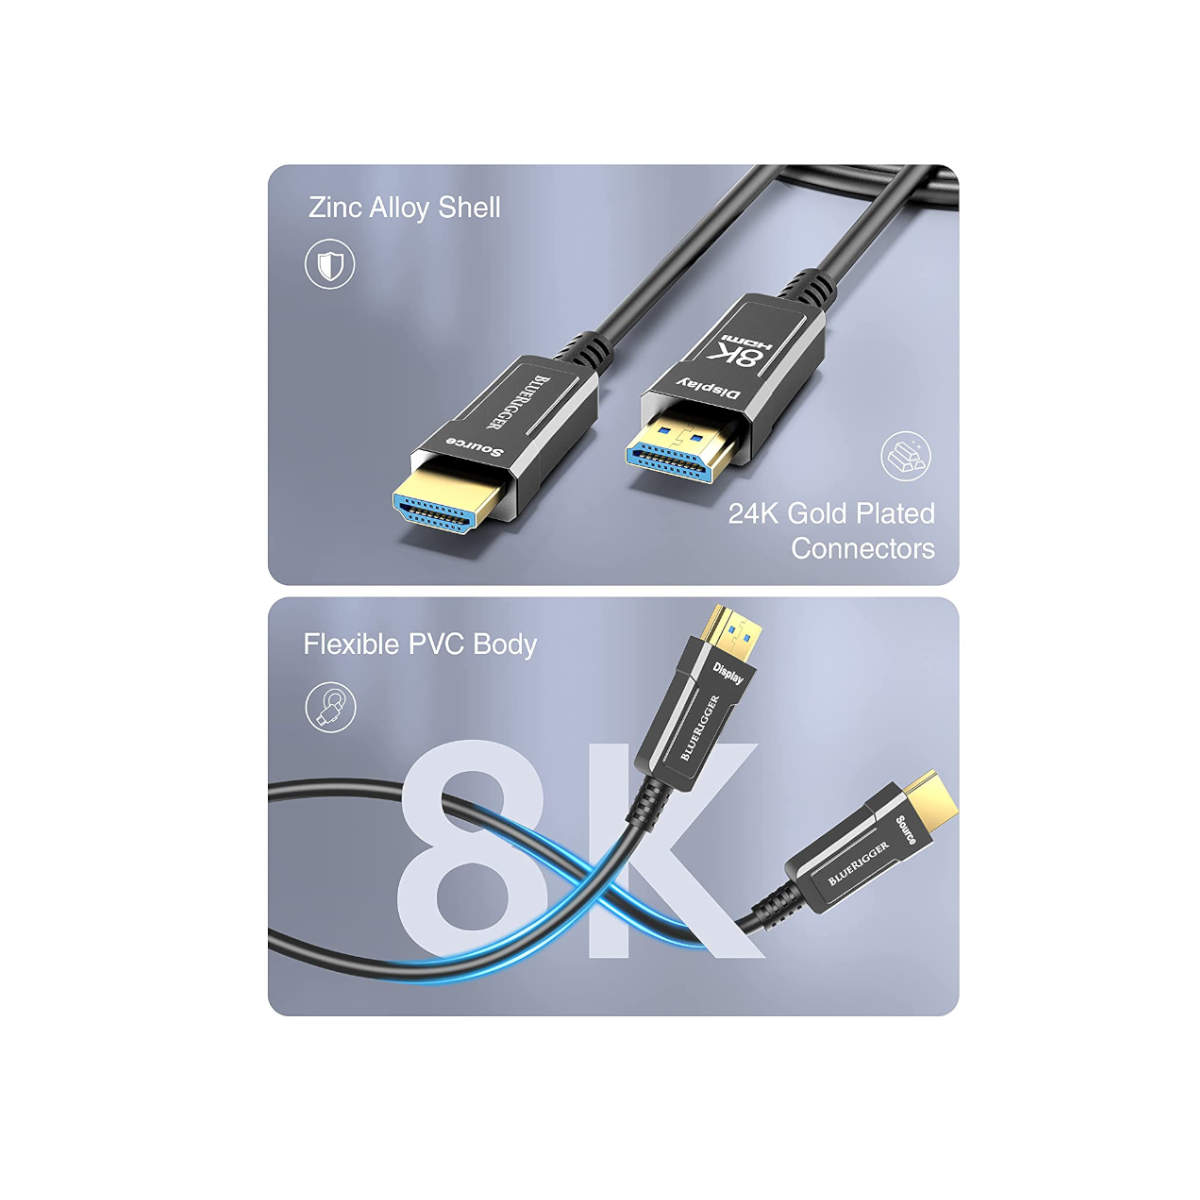  BlueRigger 4K HDMI CL3 Cable - 25FT, Black RJ45 CAT 7 Ethernet  Cable - 25FT, 2 Pack-Black & White (4K 60Hz, High Speed, 10Gbps, 1000MHz,  CAT7 Patch Cable) : Electronics